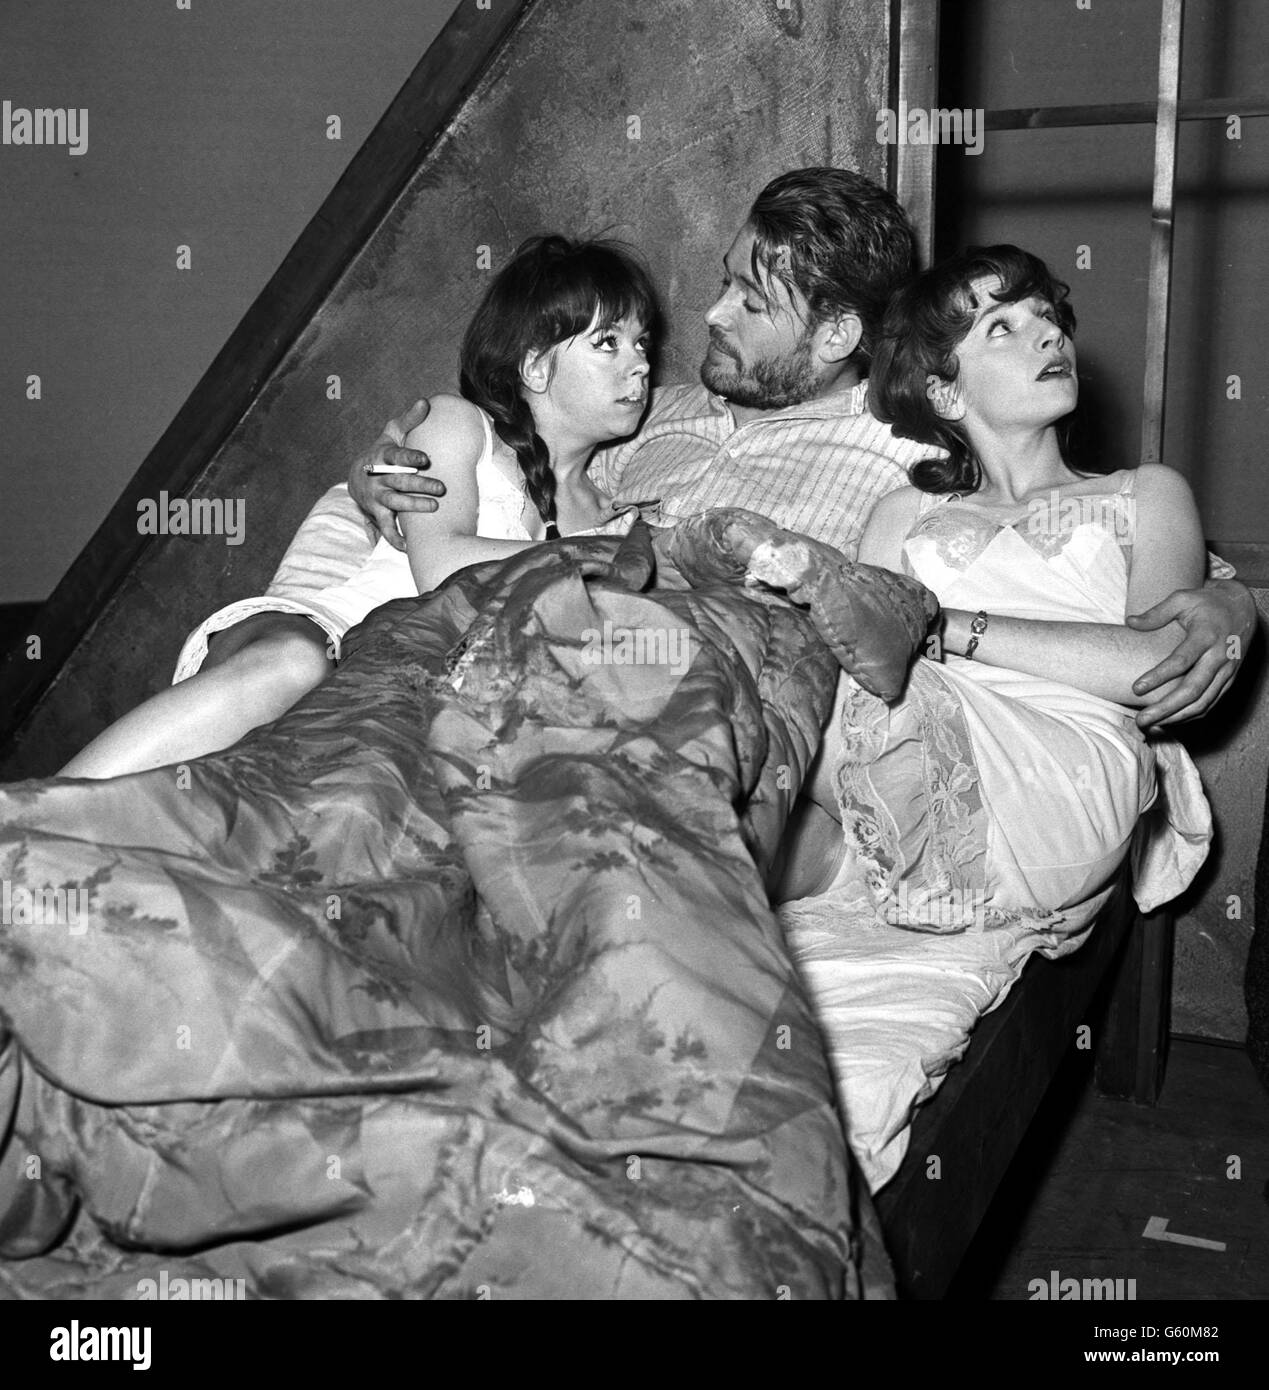 Actor Peter O'Toole in the role of Baal in the Brecht play of the same name, caught in a compromising situation with two sisters played by Kate Binchy (left) and Annette Robinson (right) at The Phoenix during a full dress rehearsal. CELEBRITY Stock Photo